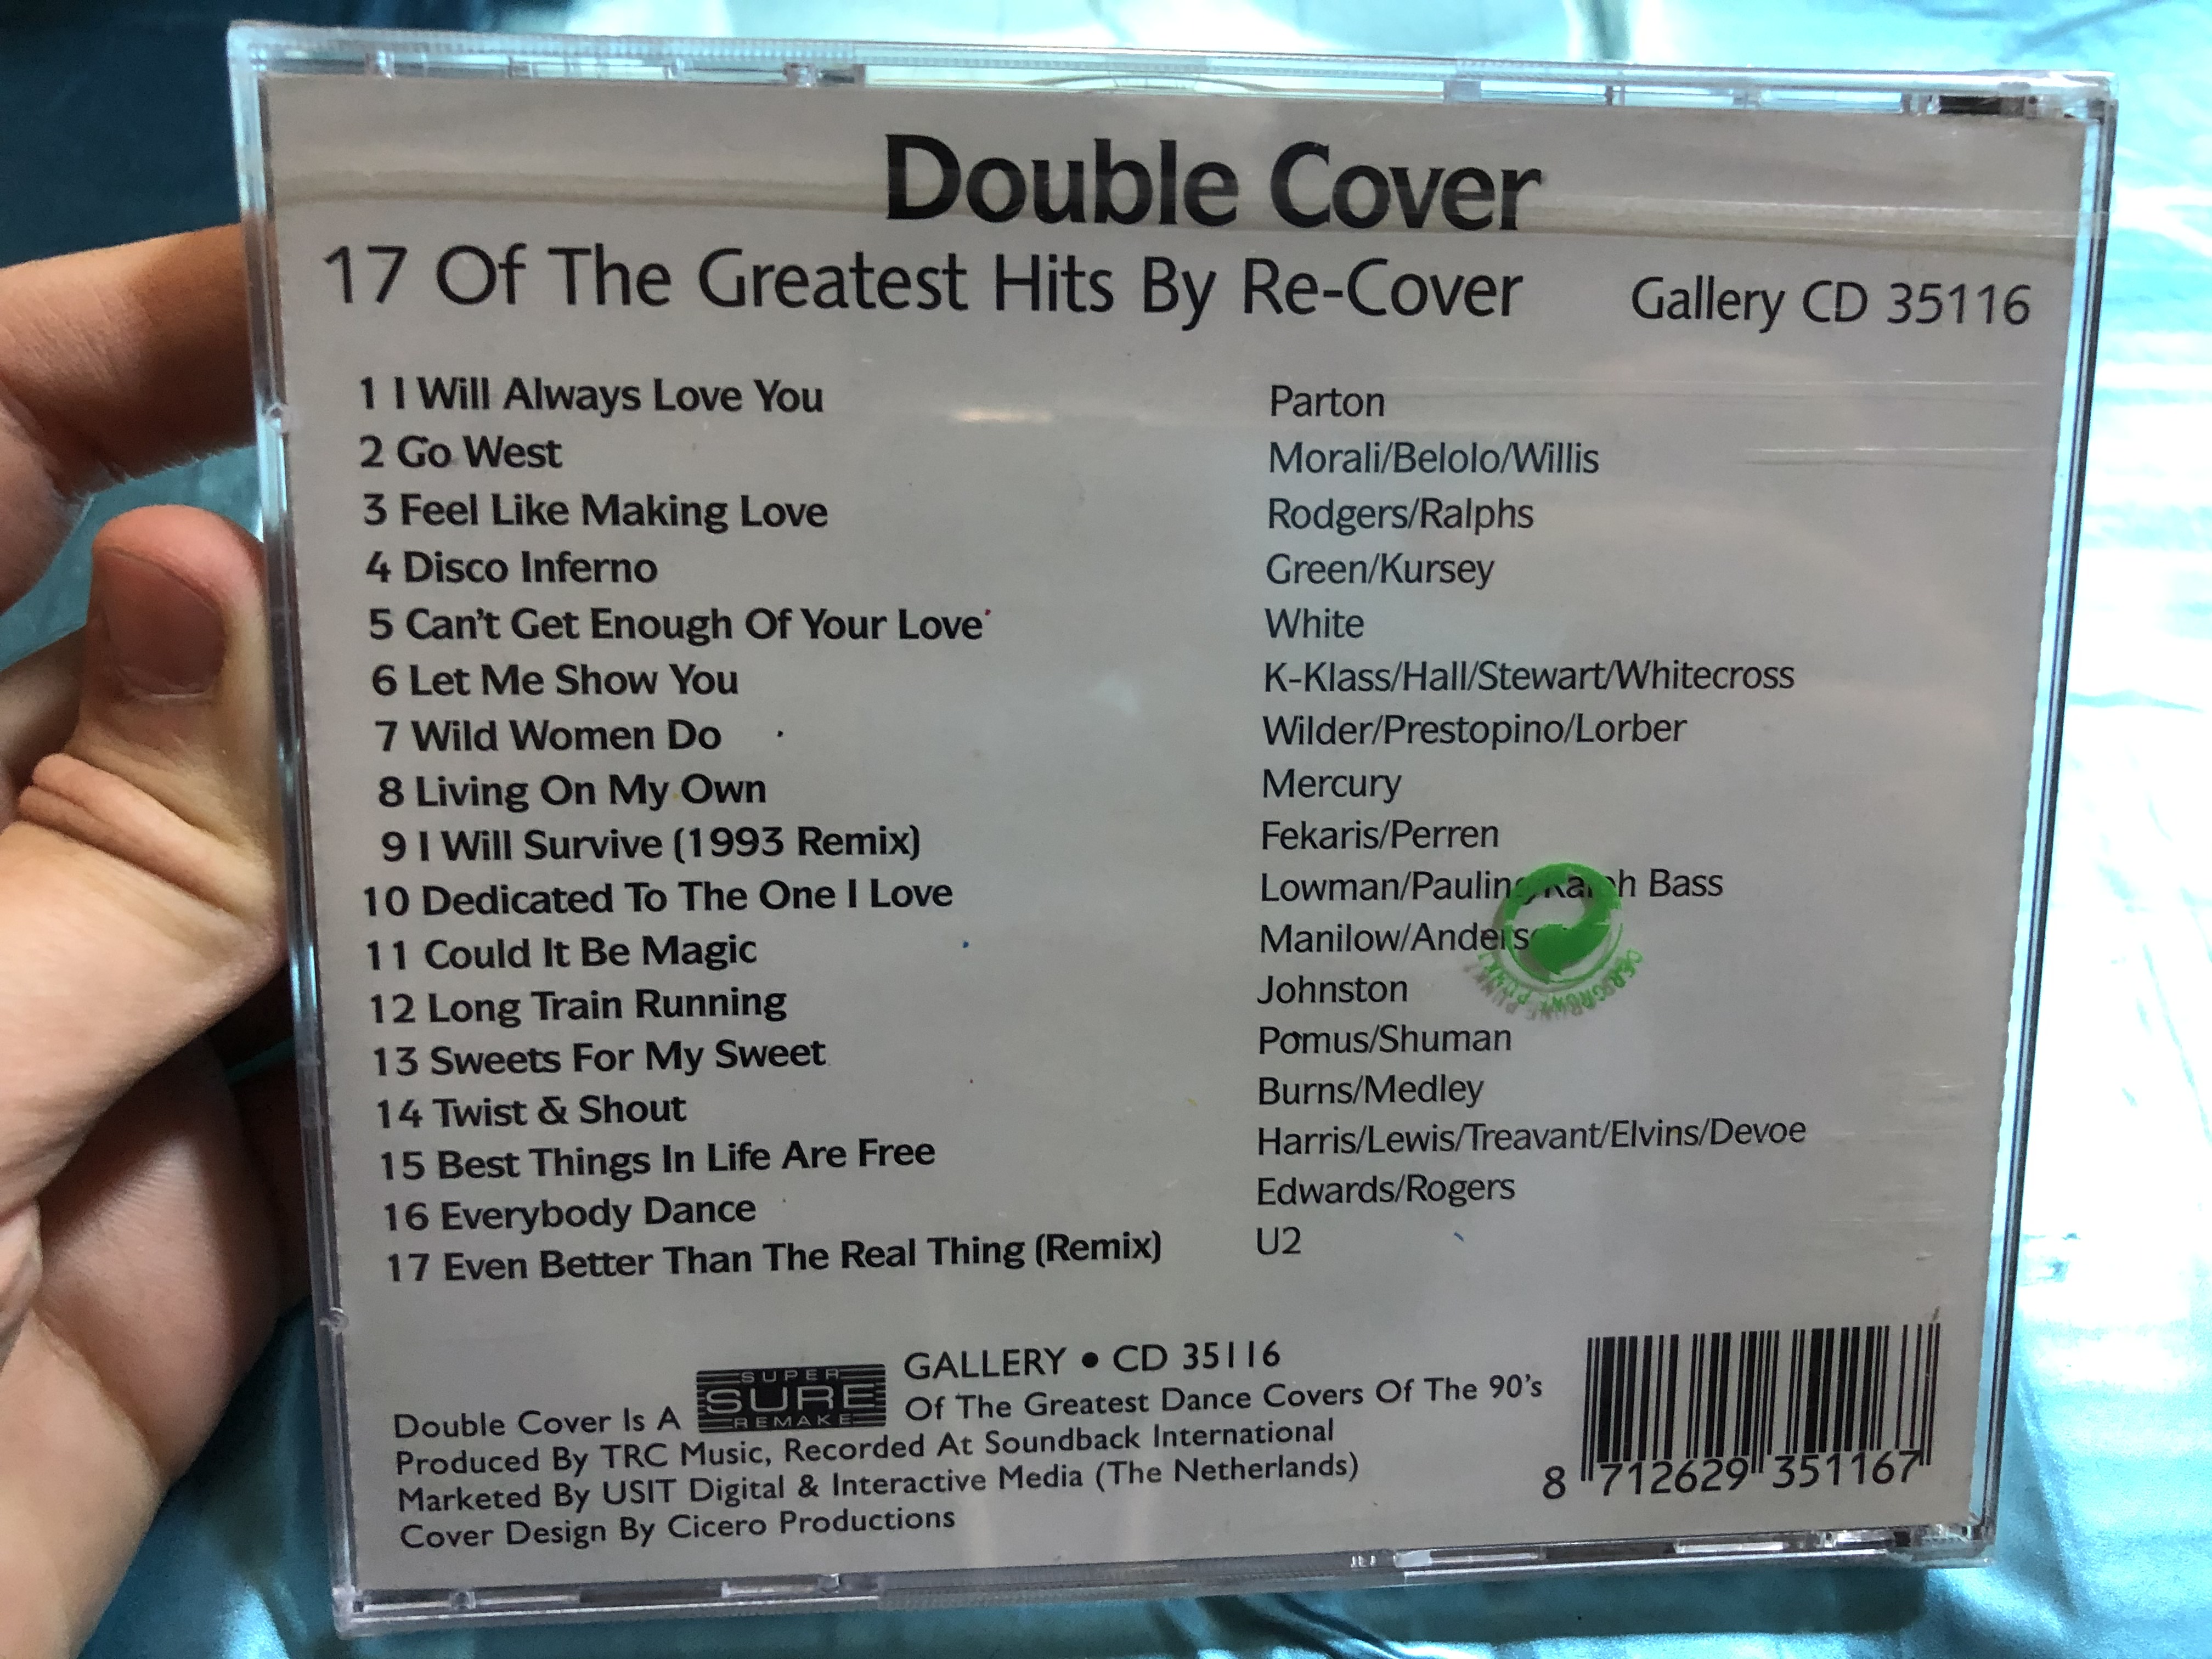 double-cover-the-cover-hits-recovered-by-re-cover-gallery-audio-cd-cd-35116-3-.jpg